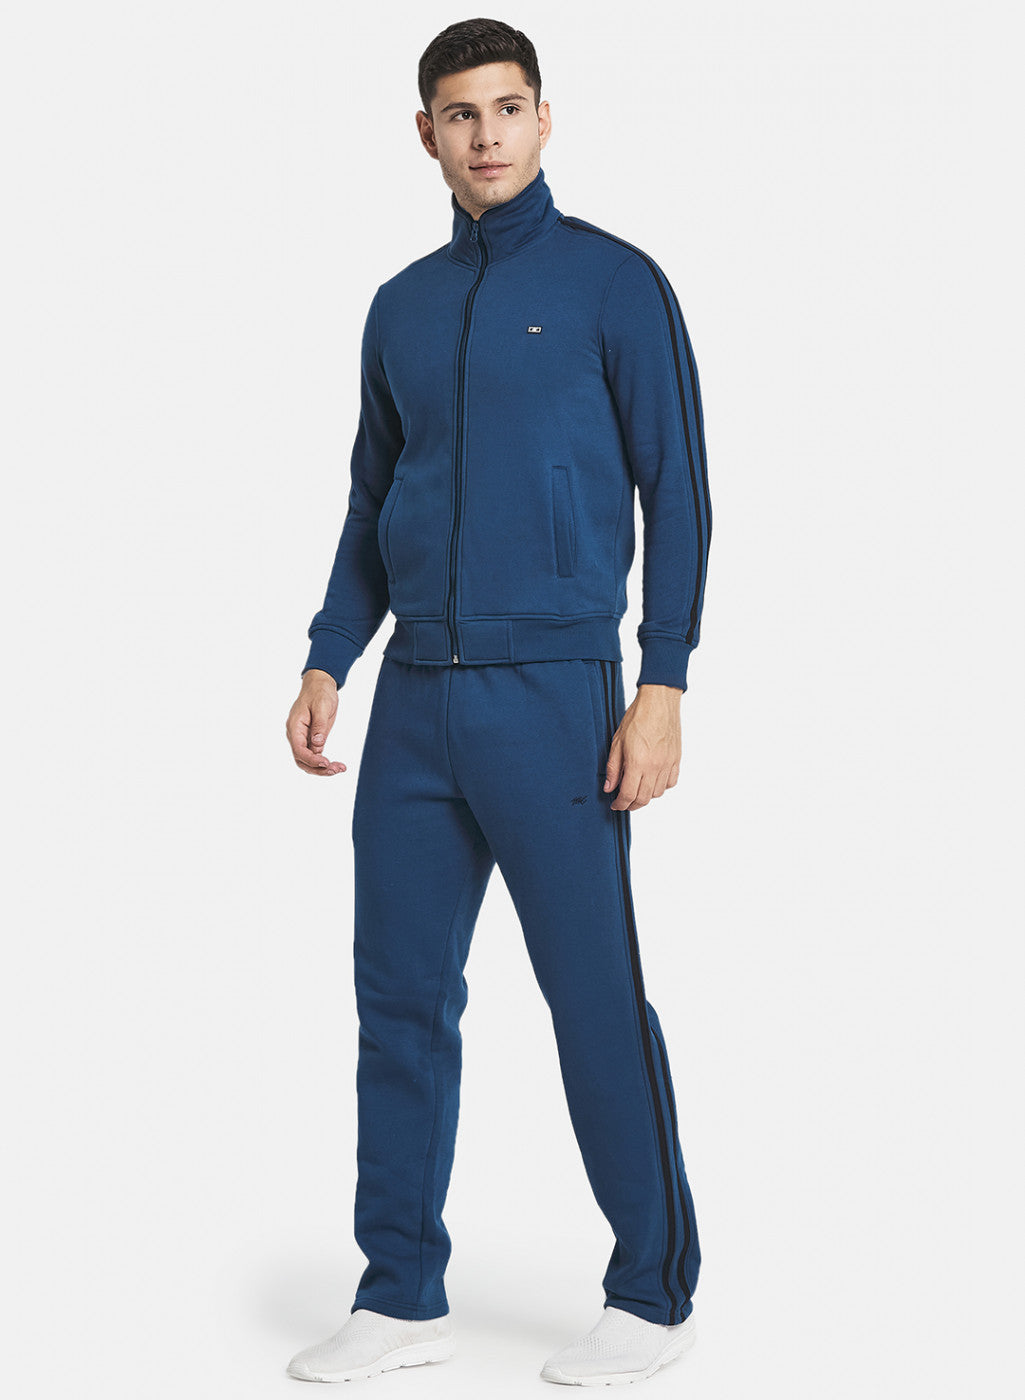 Men Teal Blue Tracksuit with Double piping on Sleeve